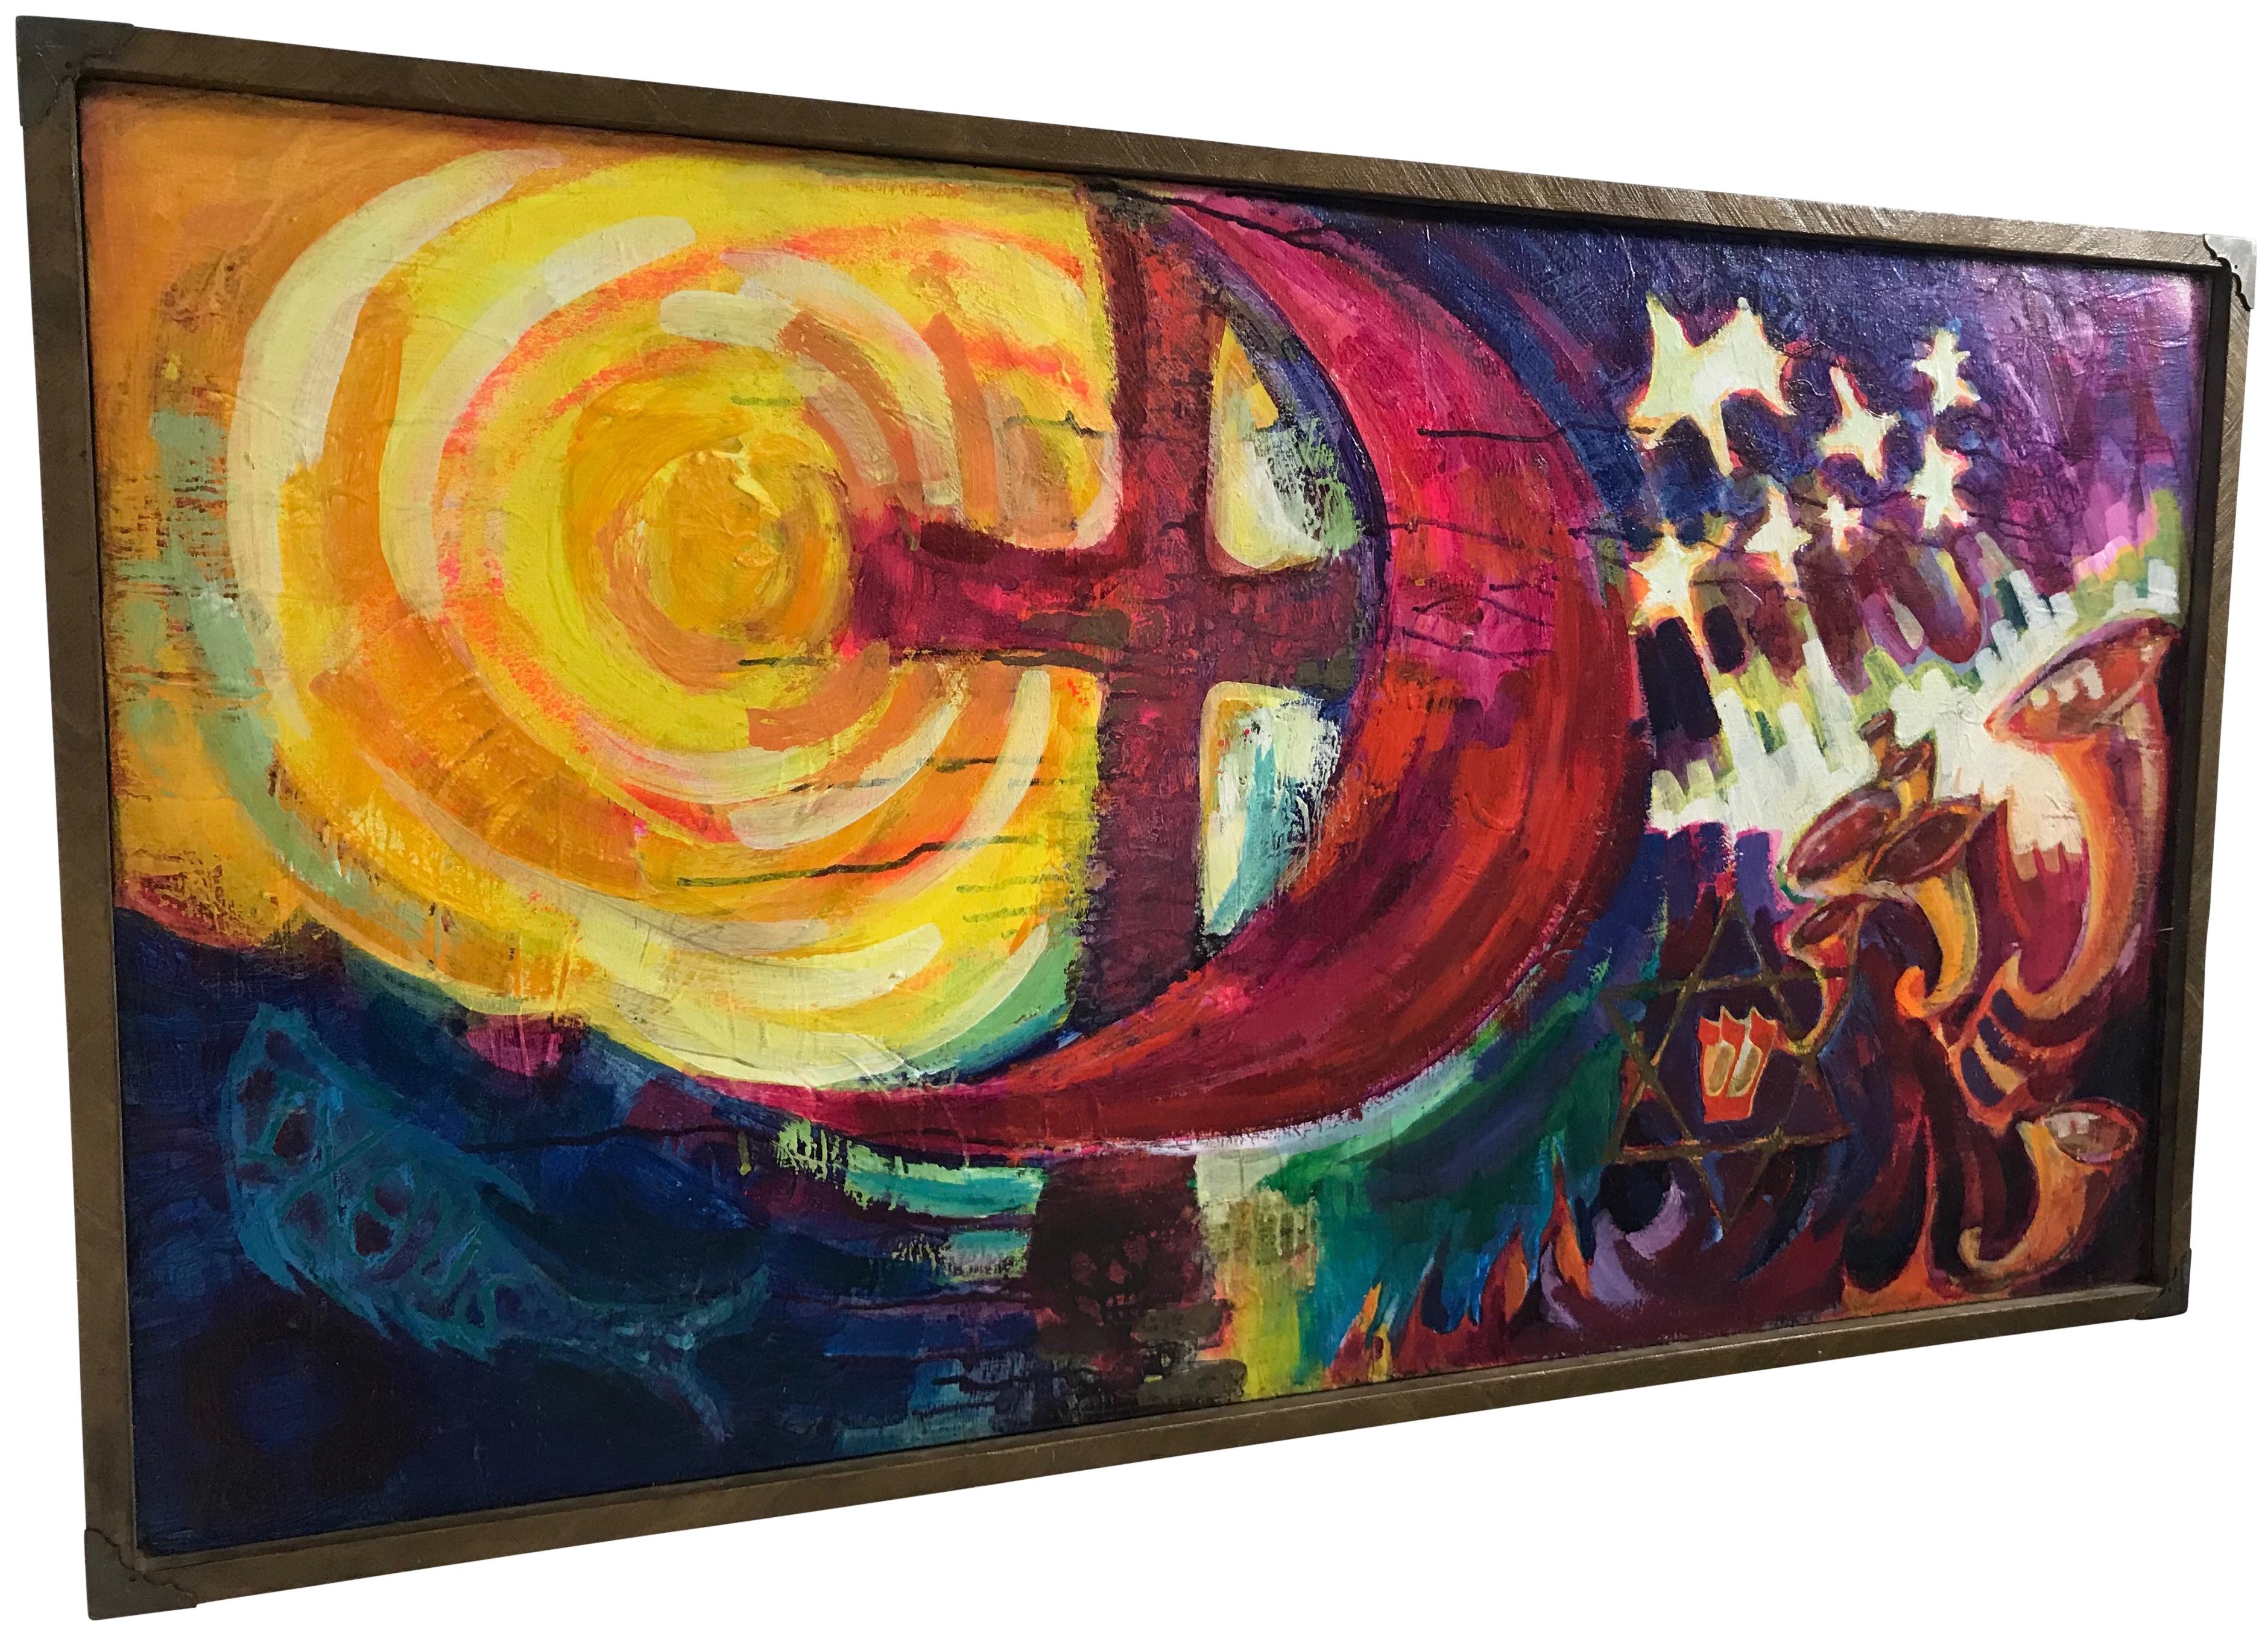 Vibrant Mid-Century Modern Abstract Painting, American 1960s-1970s In Good Condition For Sale In San Francisco, CA